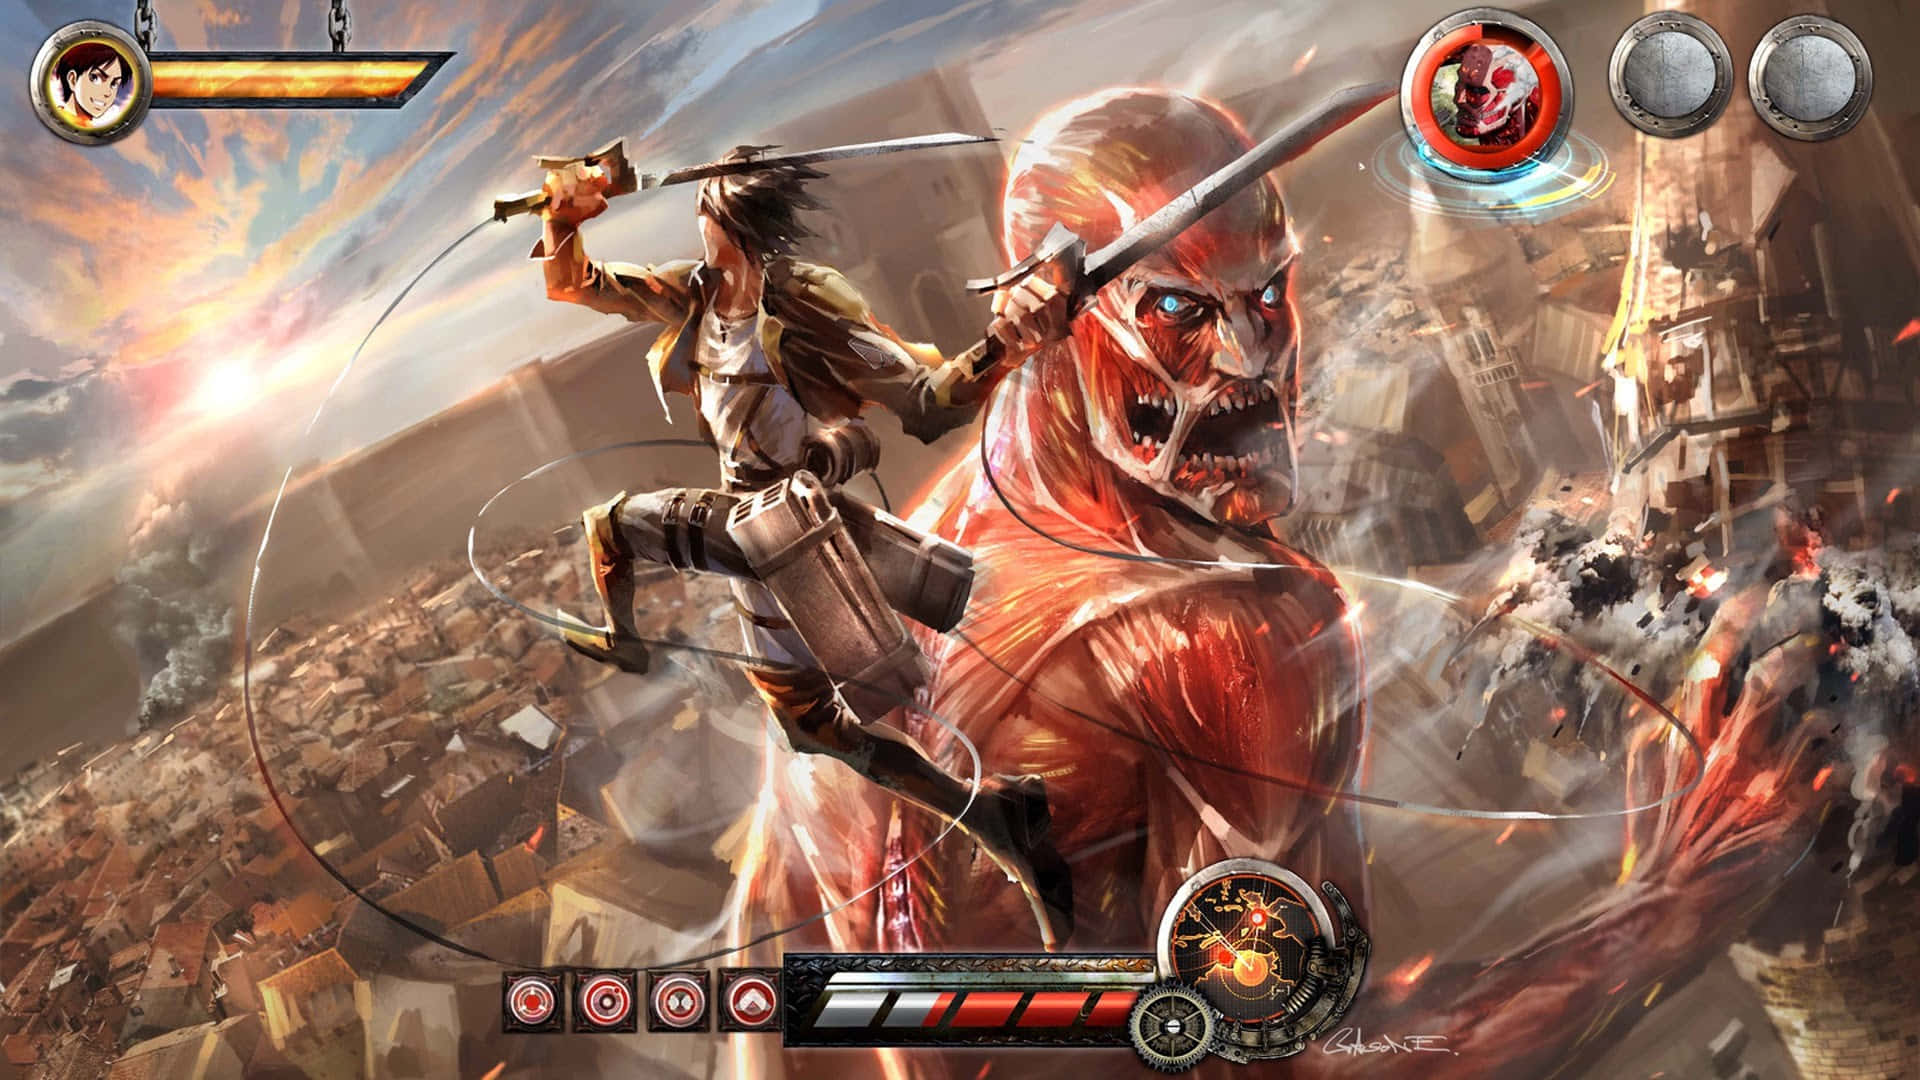 Adventure awaits with the Attack On Titan Video Game. Wallpaper